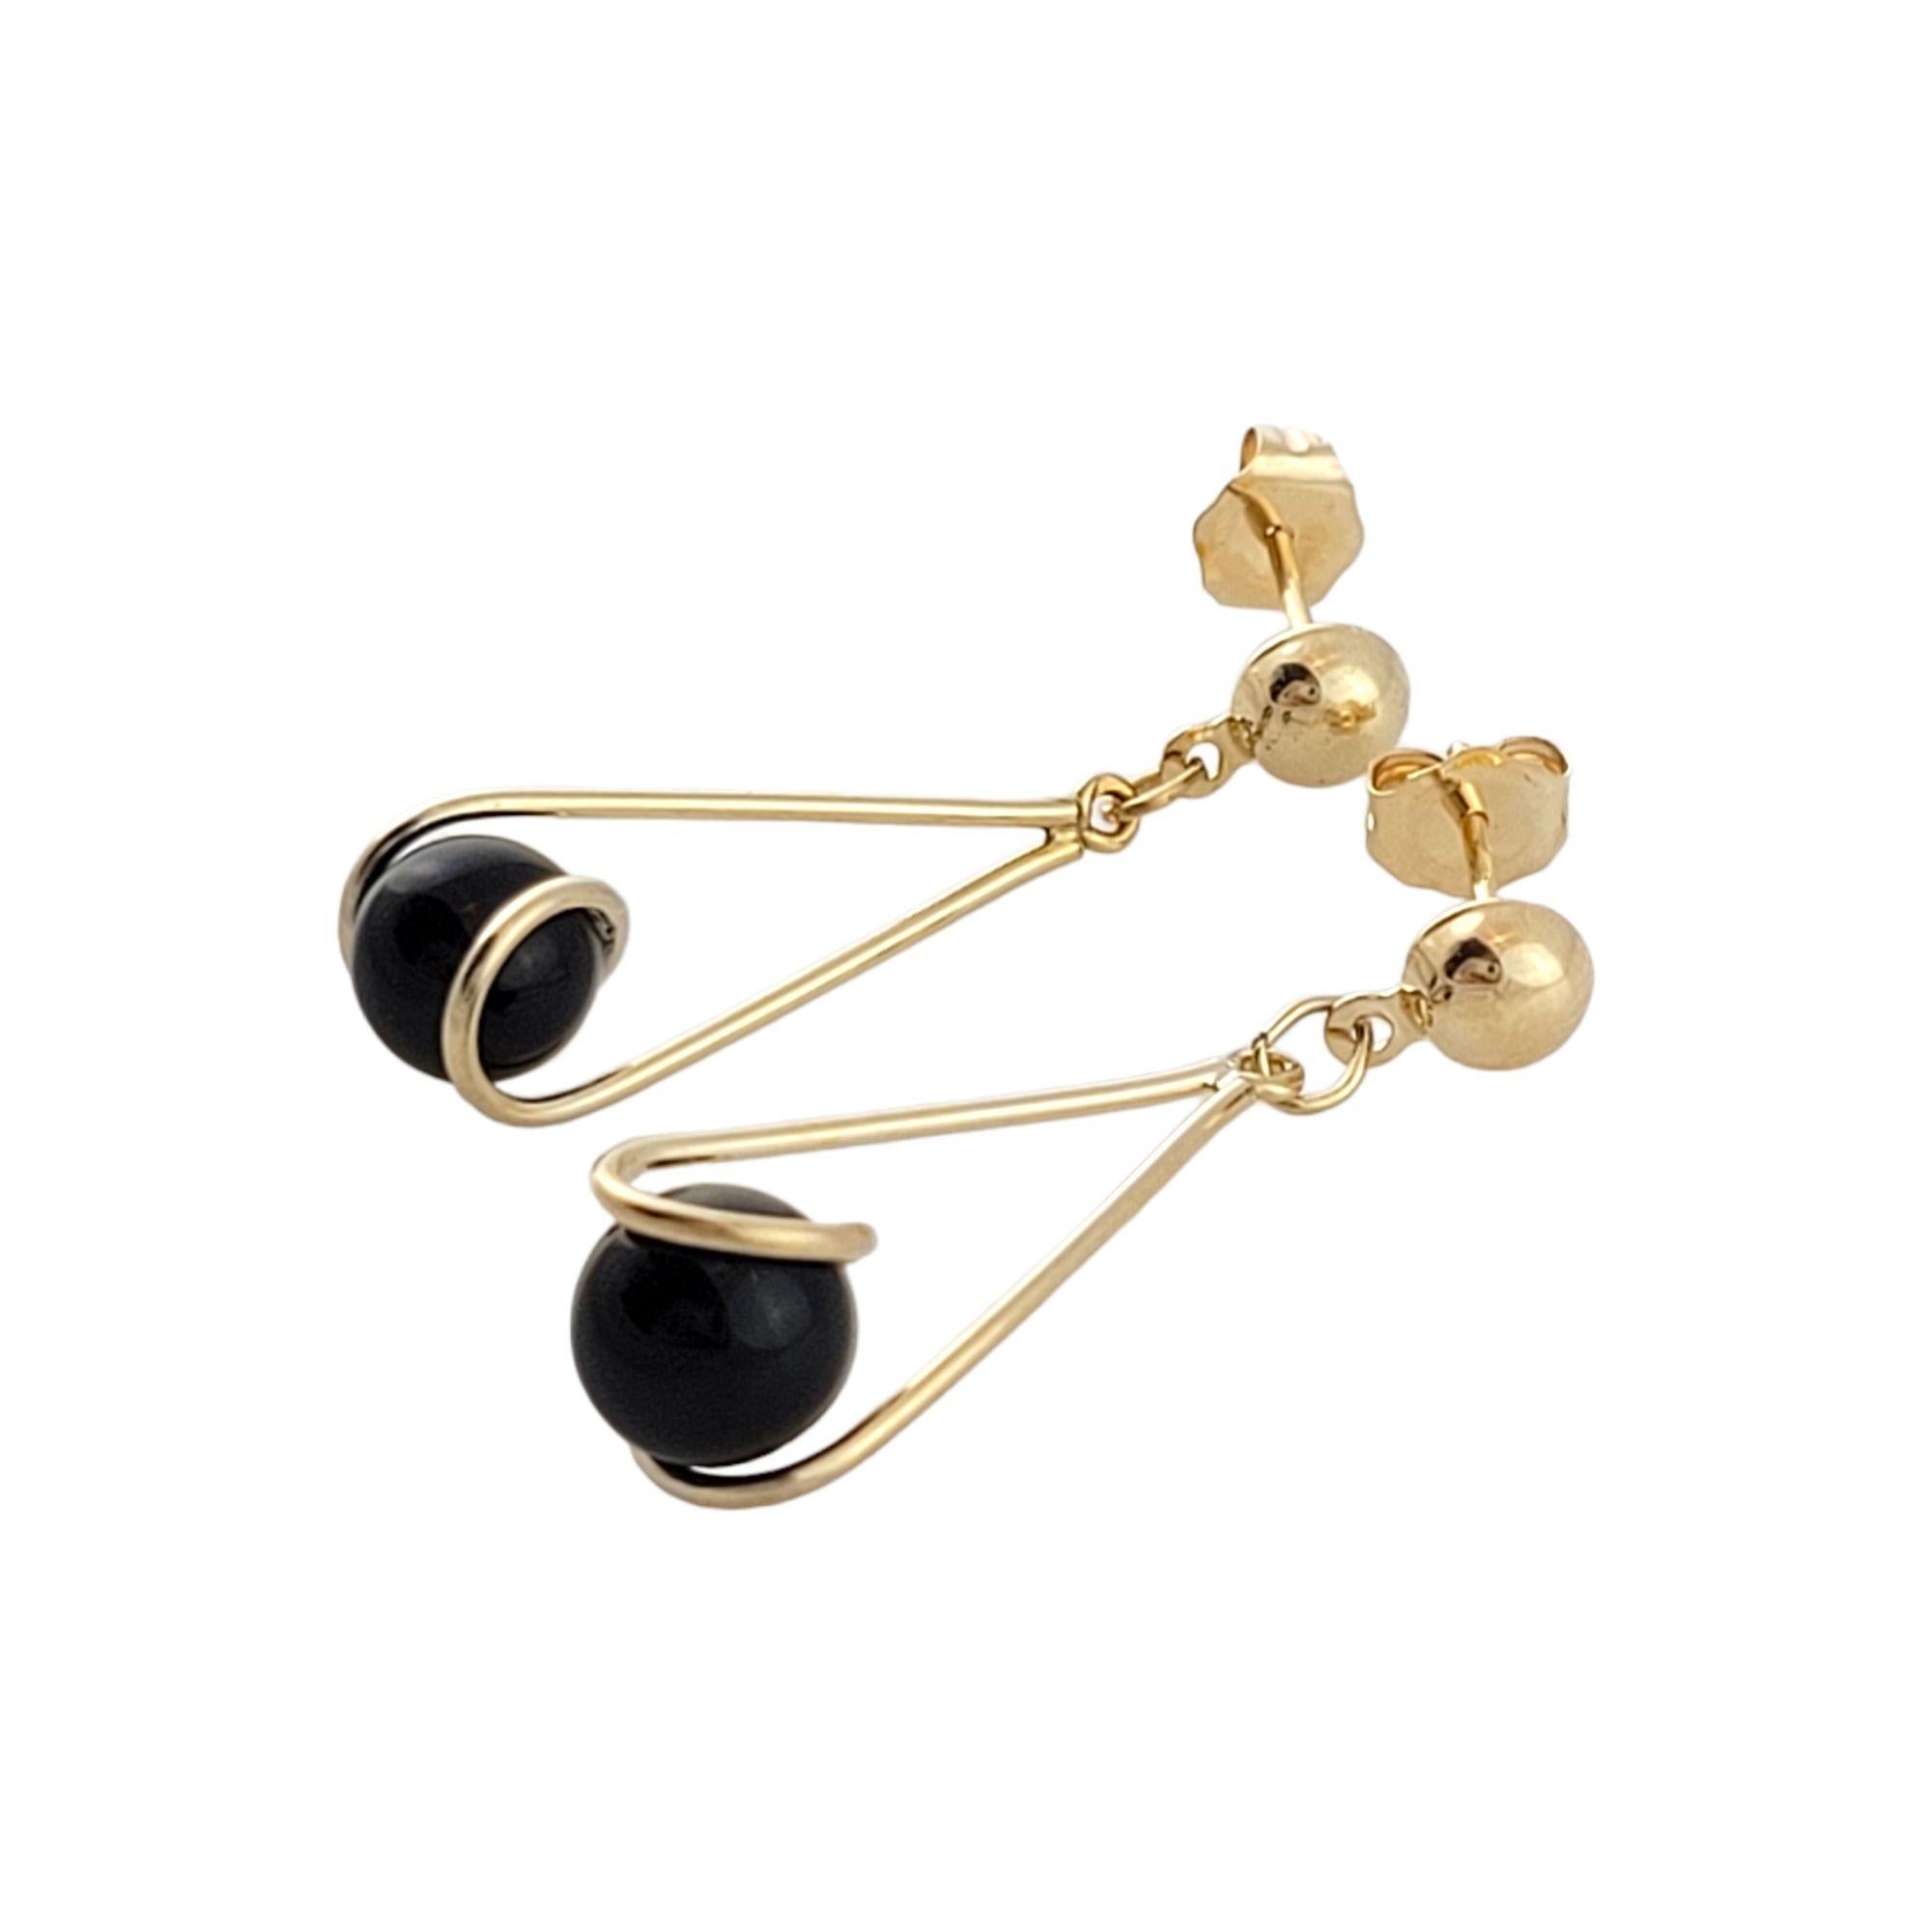 2 gorgeous black onyx beads encased in 14K yellow gold dangle earrings!

Onyx size: approx.  5.9mm each

Dangle: approx. 28.5mm

Weight: 1.3 g/ 0.8 dwt

Hallmark: Z. Z. 585

Very good condition, professionally polished.

Will come packaged in a gift